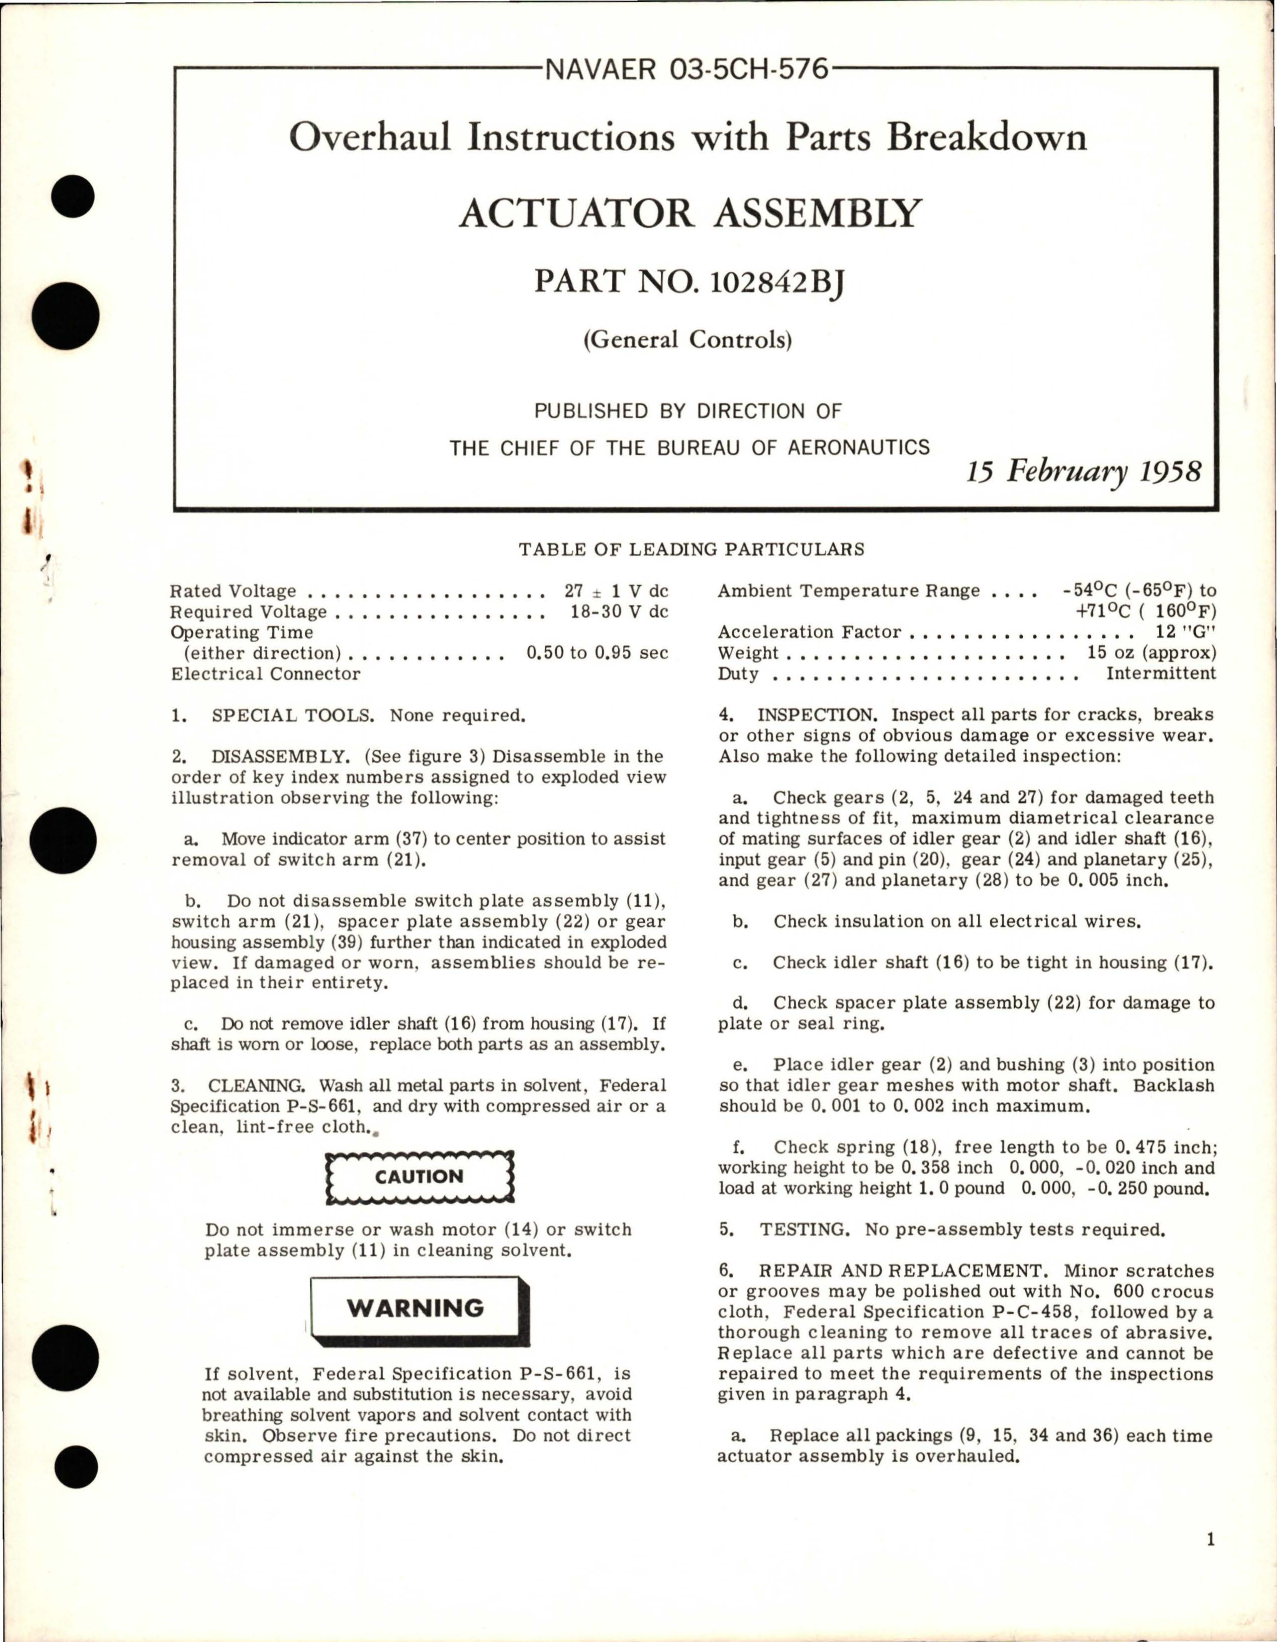 Sample page 1 from AirCorps Library document: Overhaul Instructions with Parts Breakdown for Actuator Assembly - Part 102842BJ